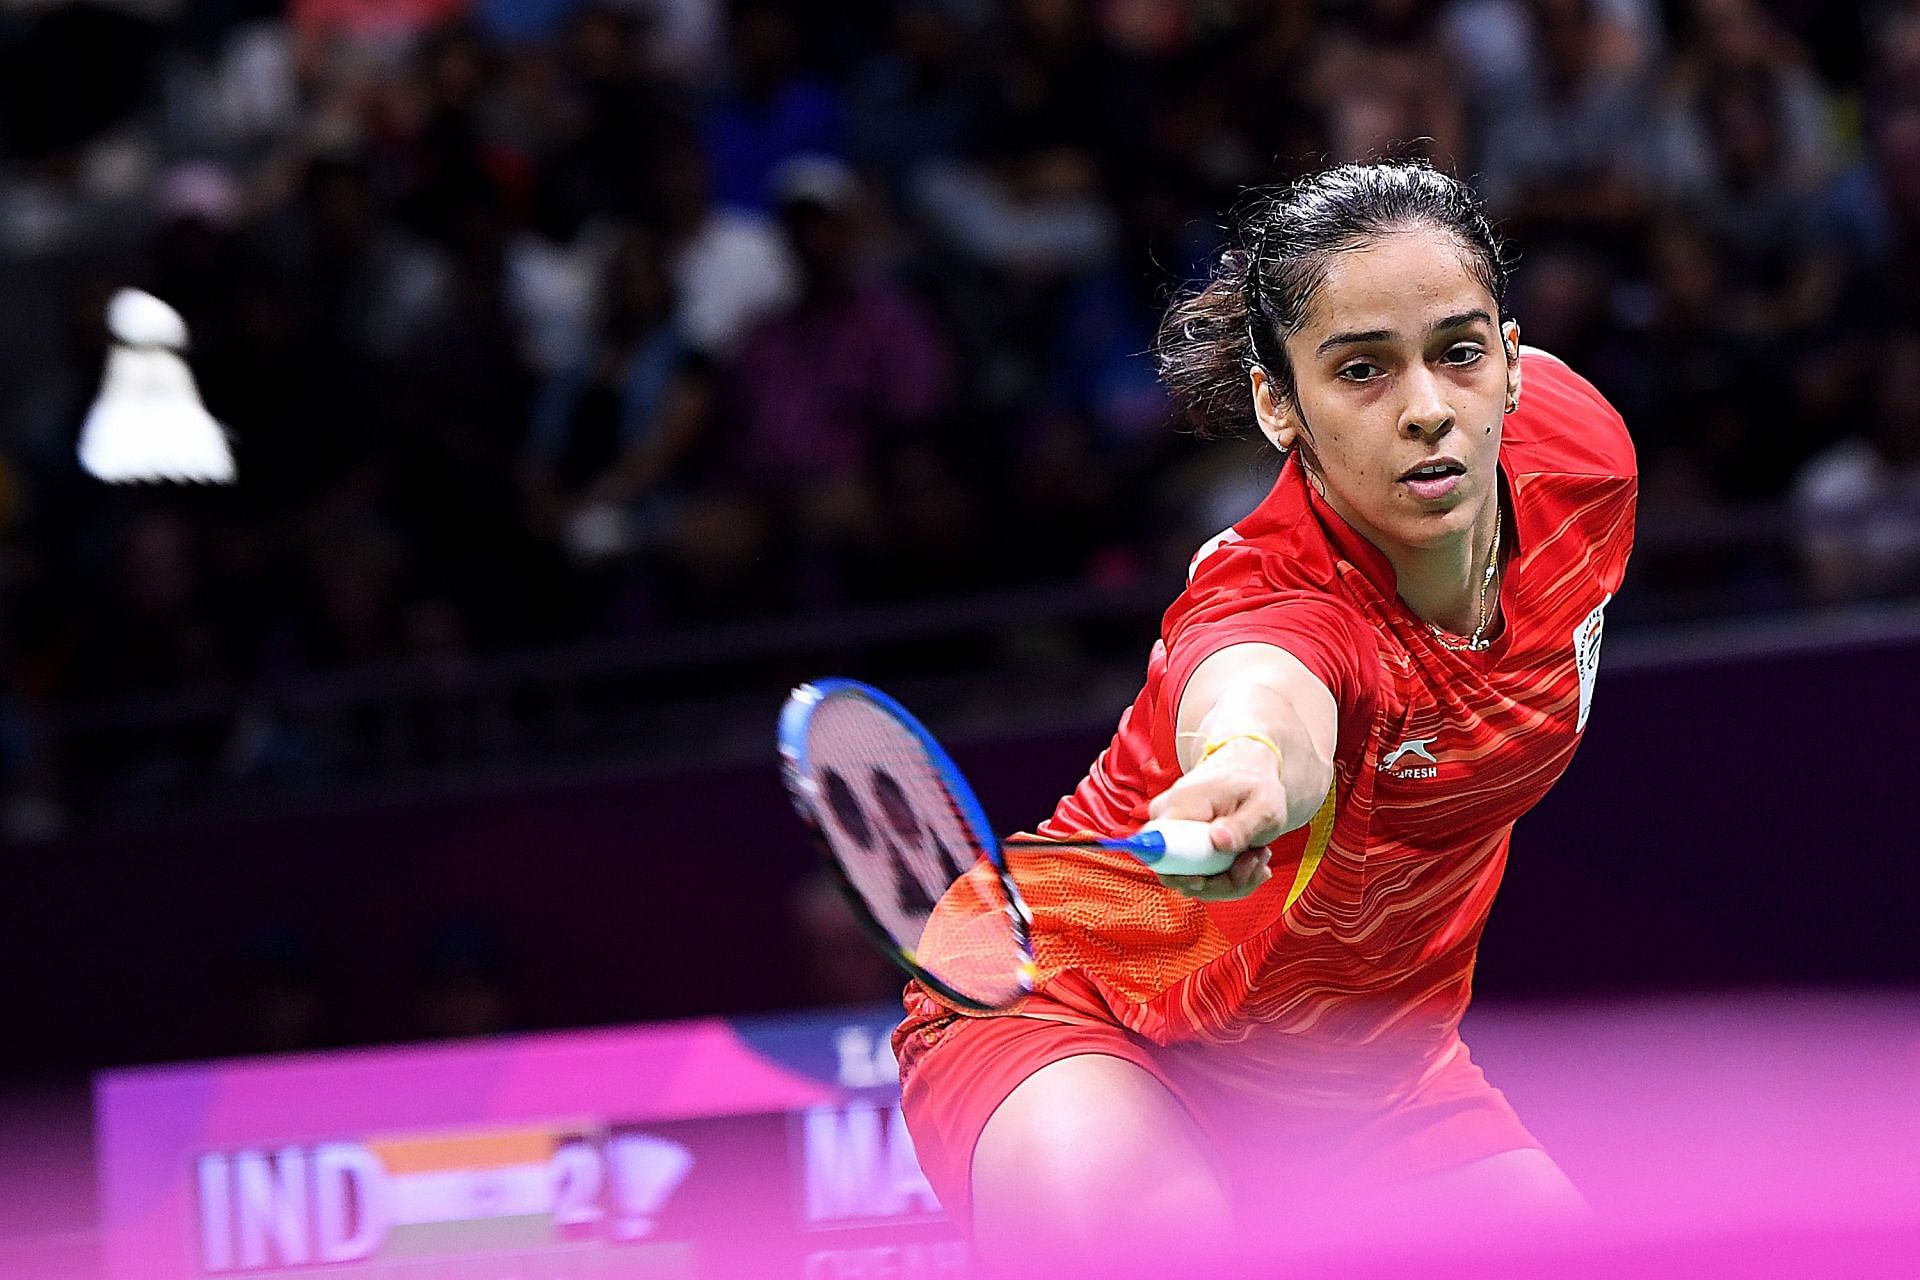 Saina Nehwal in action at the 2018 Commonwealth Games (Image courtesy: Getty)